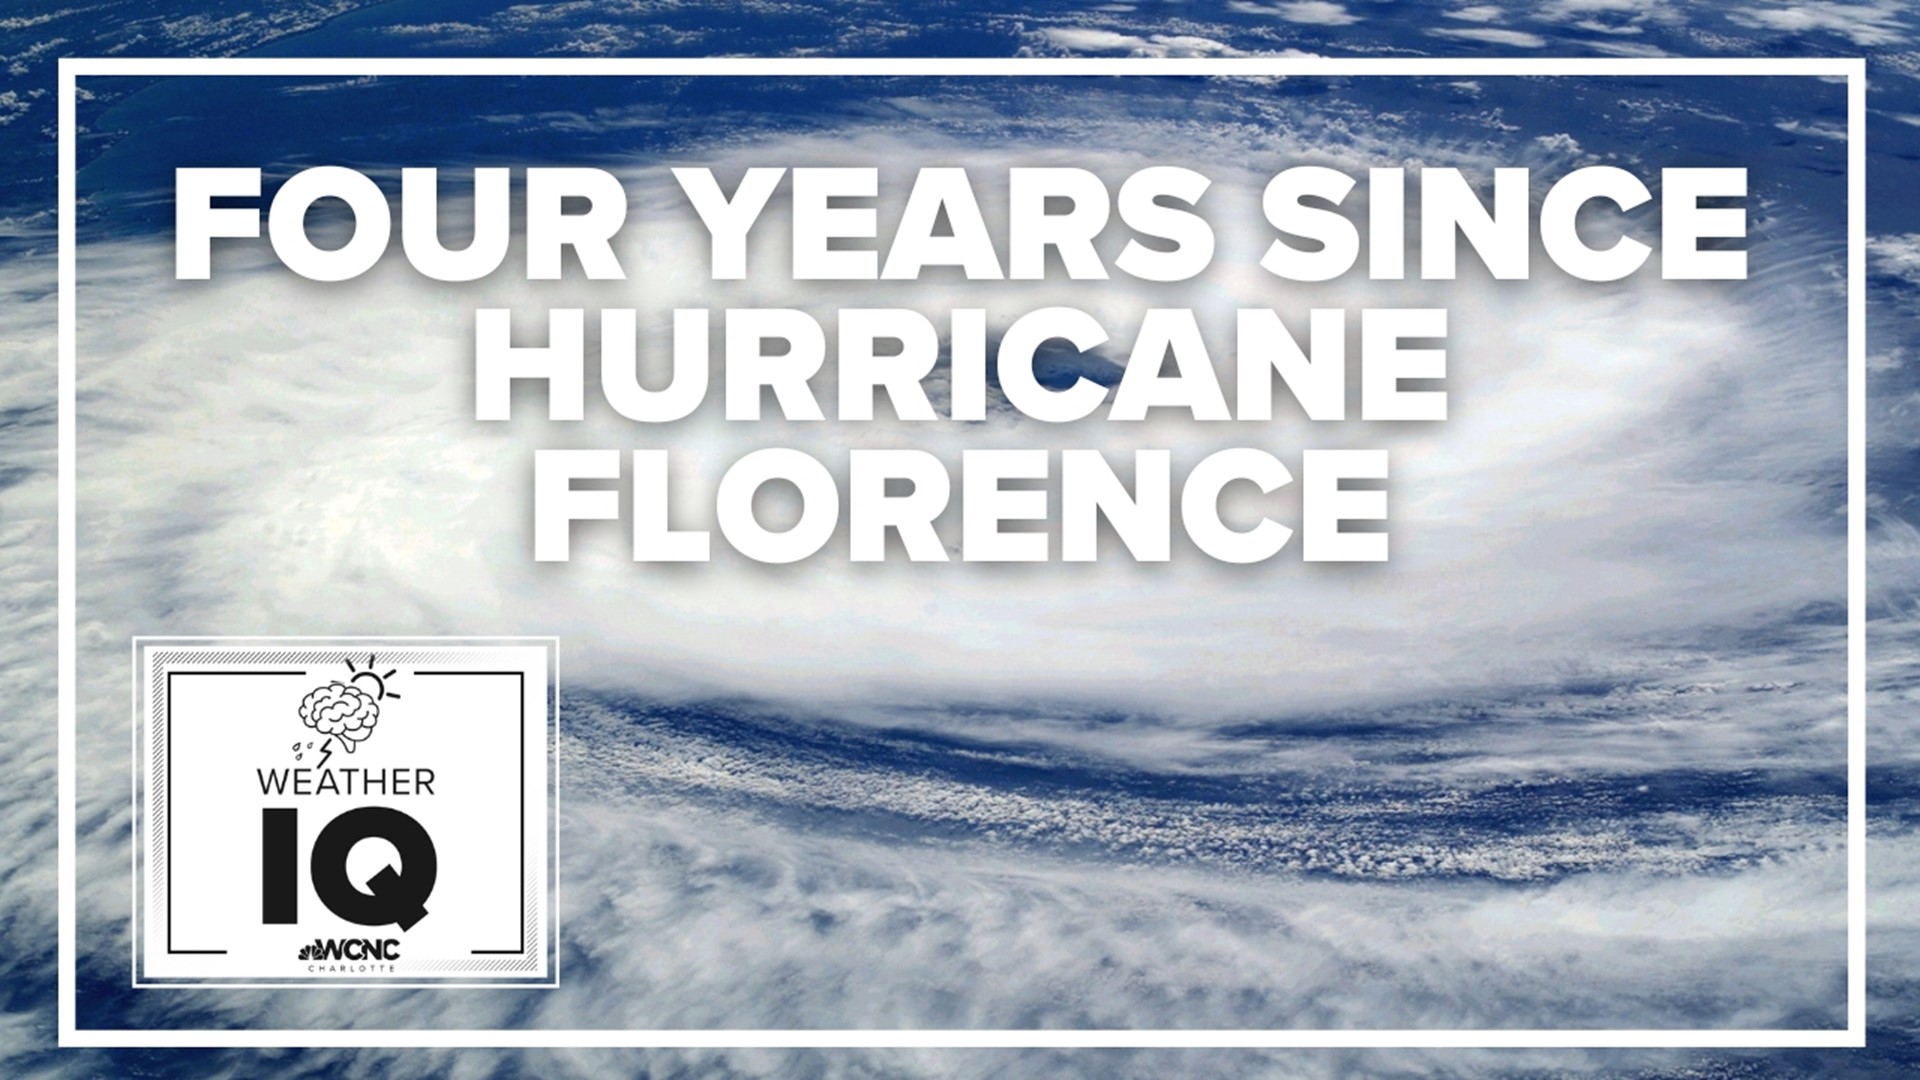 Today marks four years since Hurricane Florence.